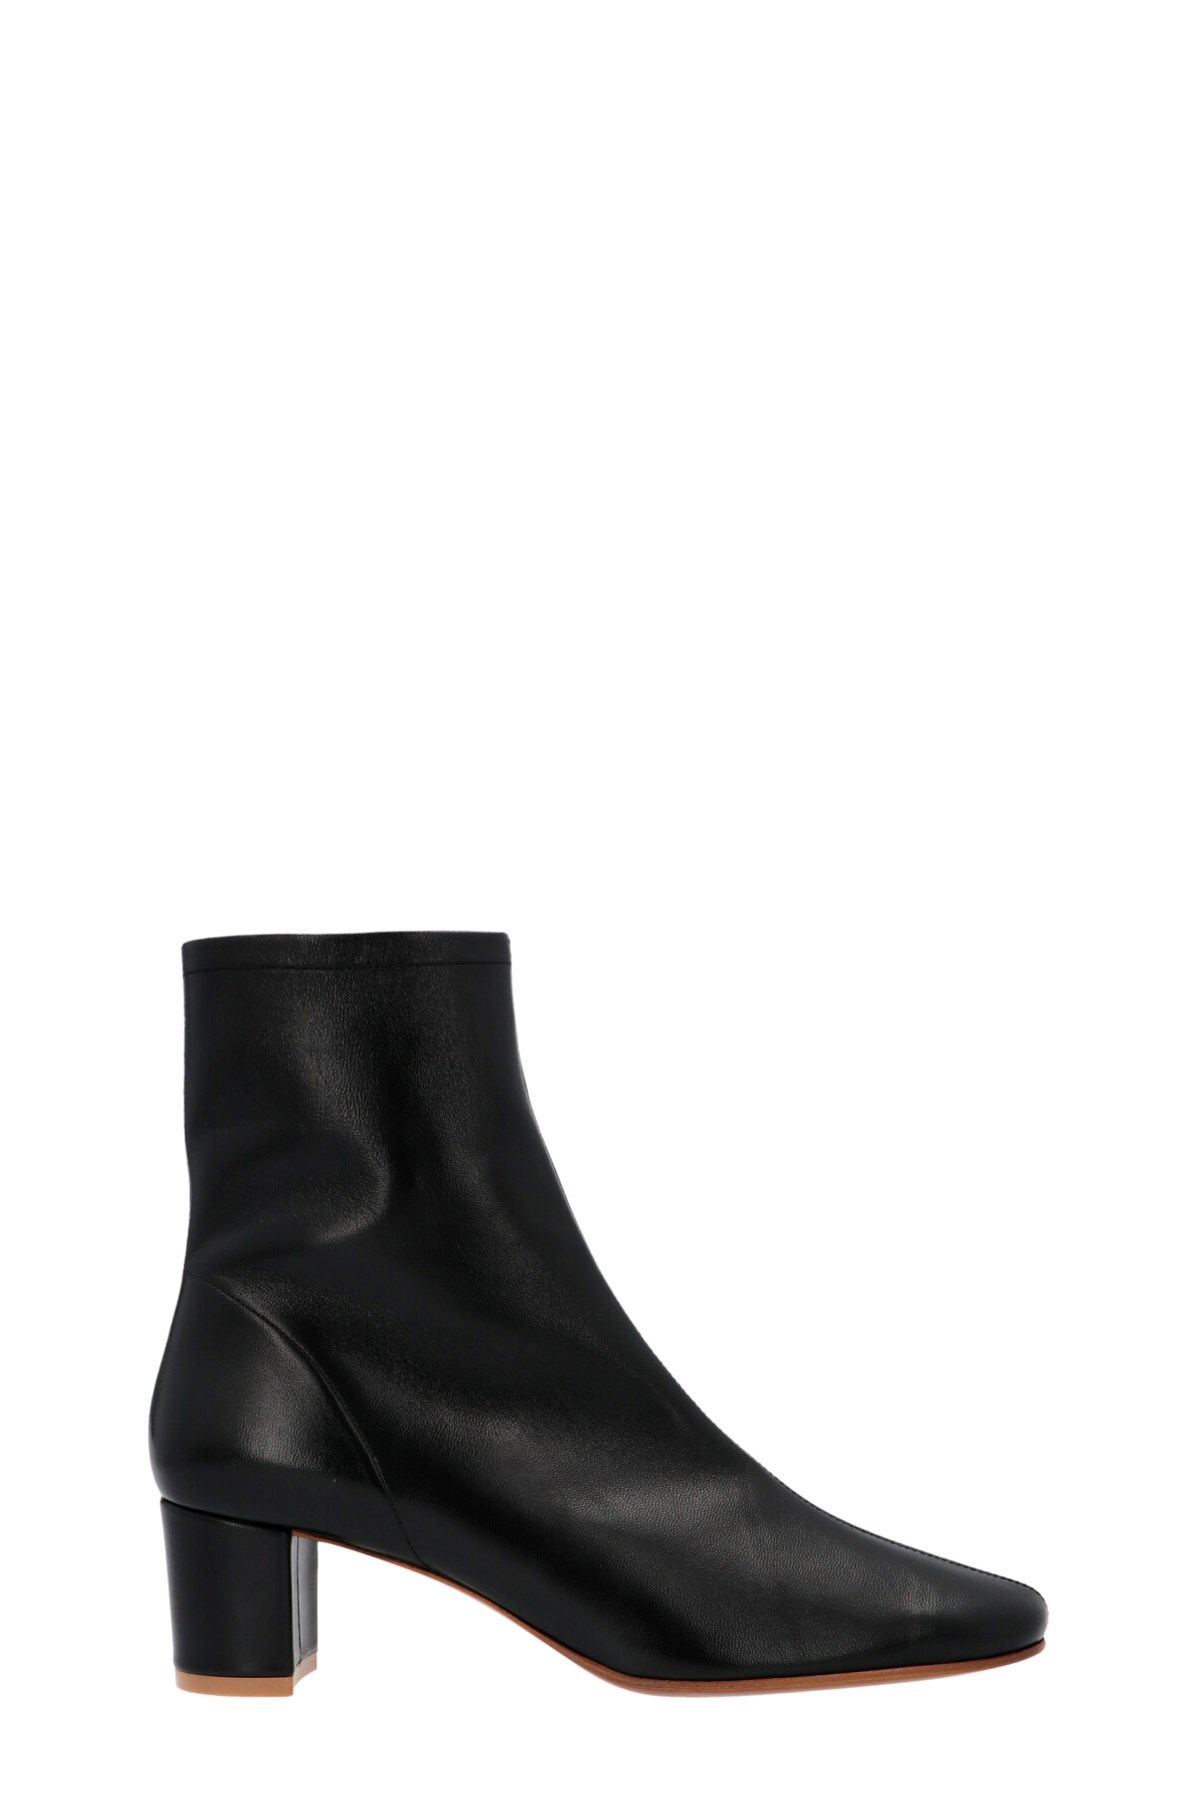 BY FAR 'Sofia’ Ankle Boots